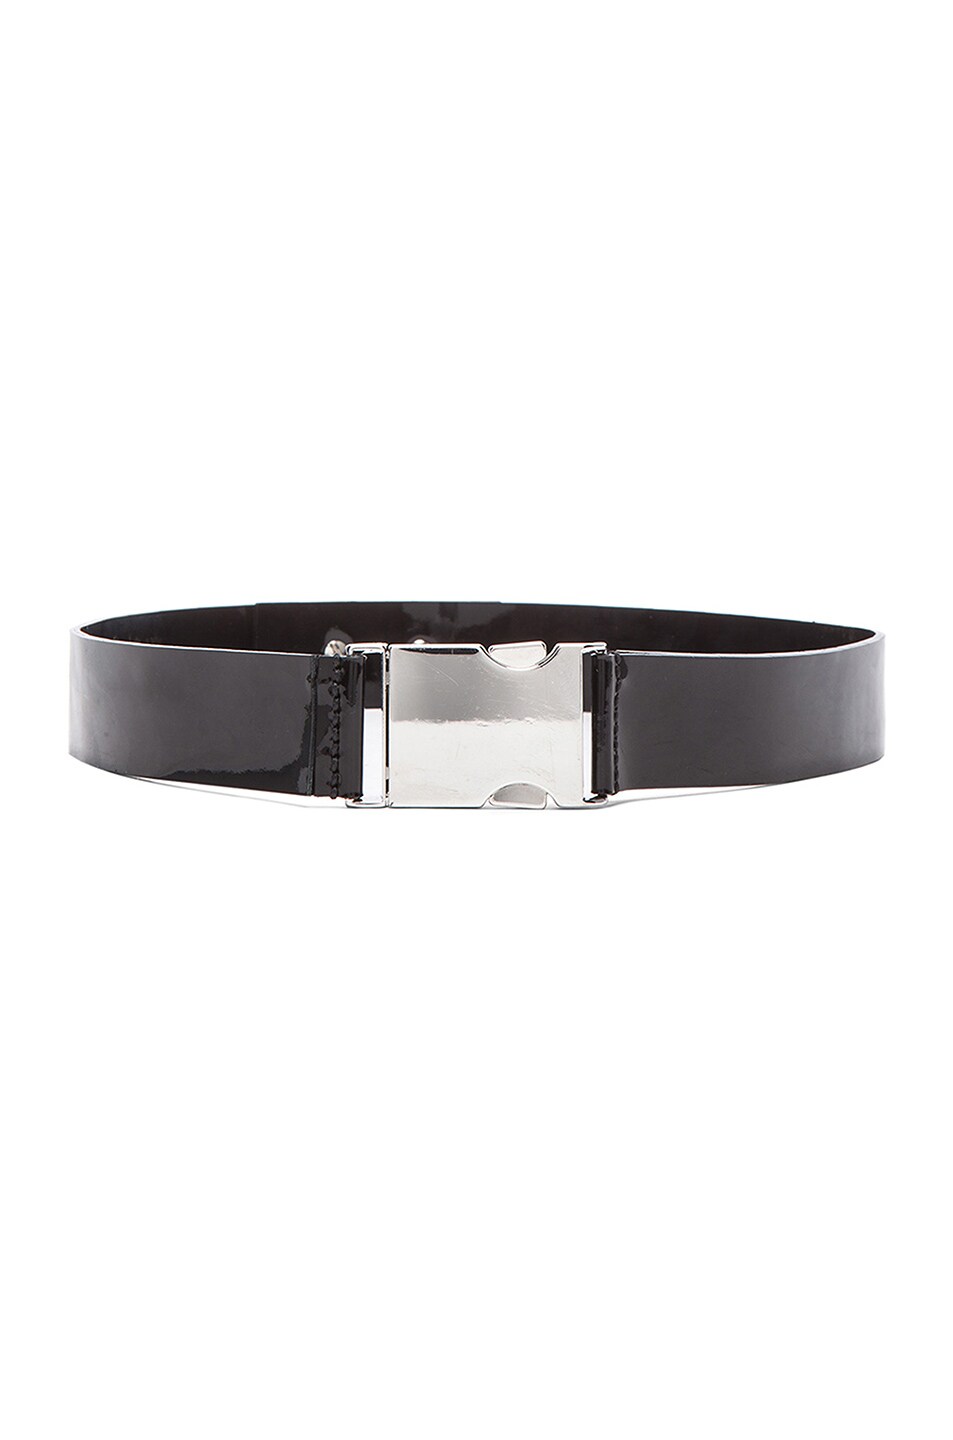 Image 1 of David Koma Patent Leather Buckle Belt in Black & Silver